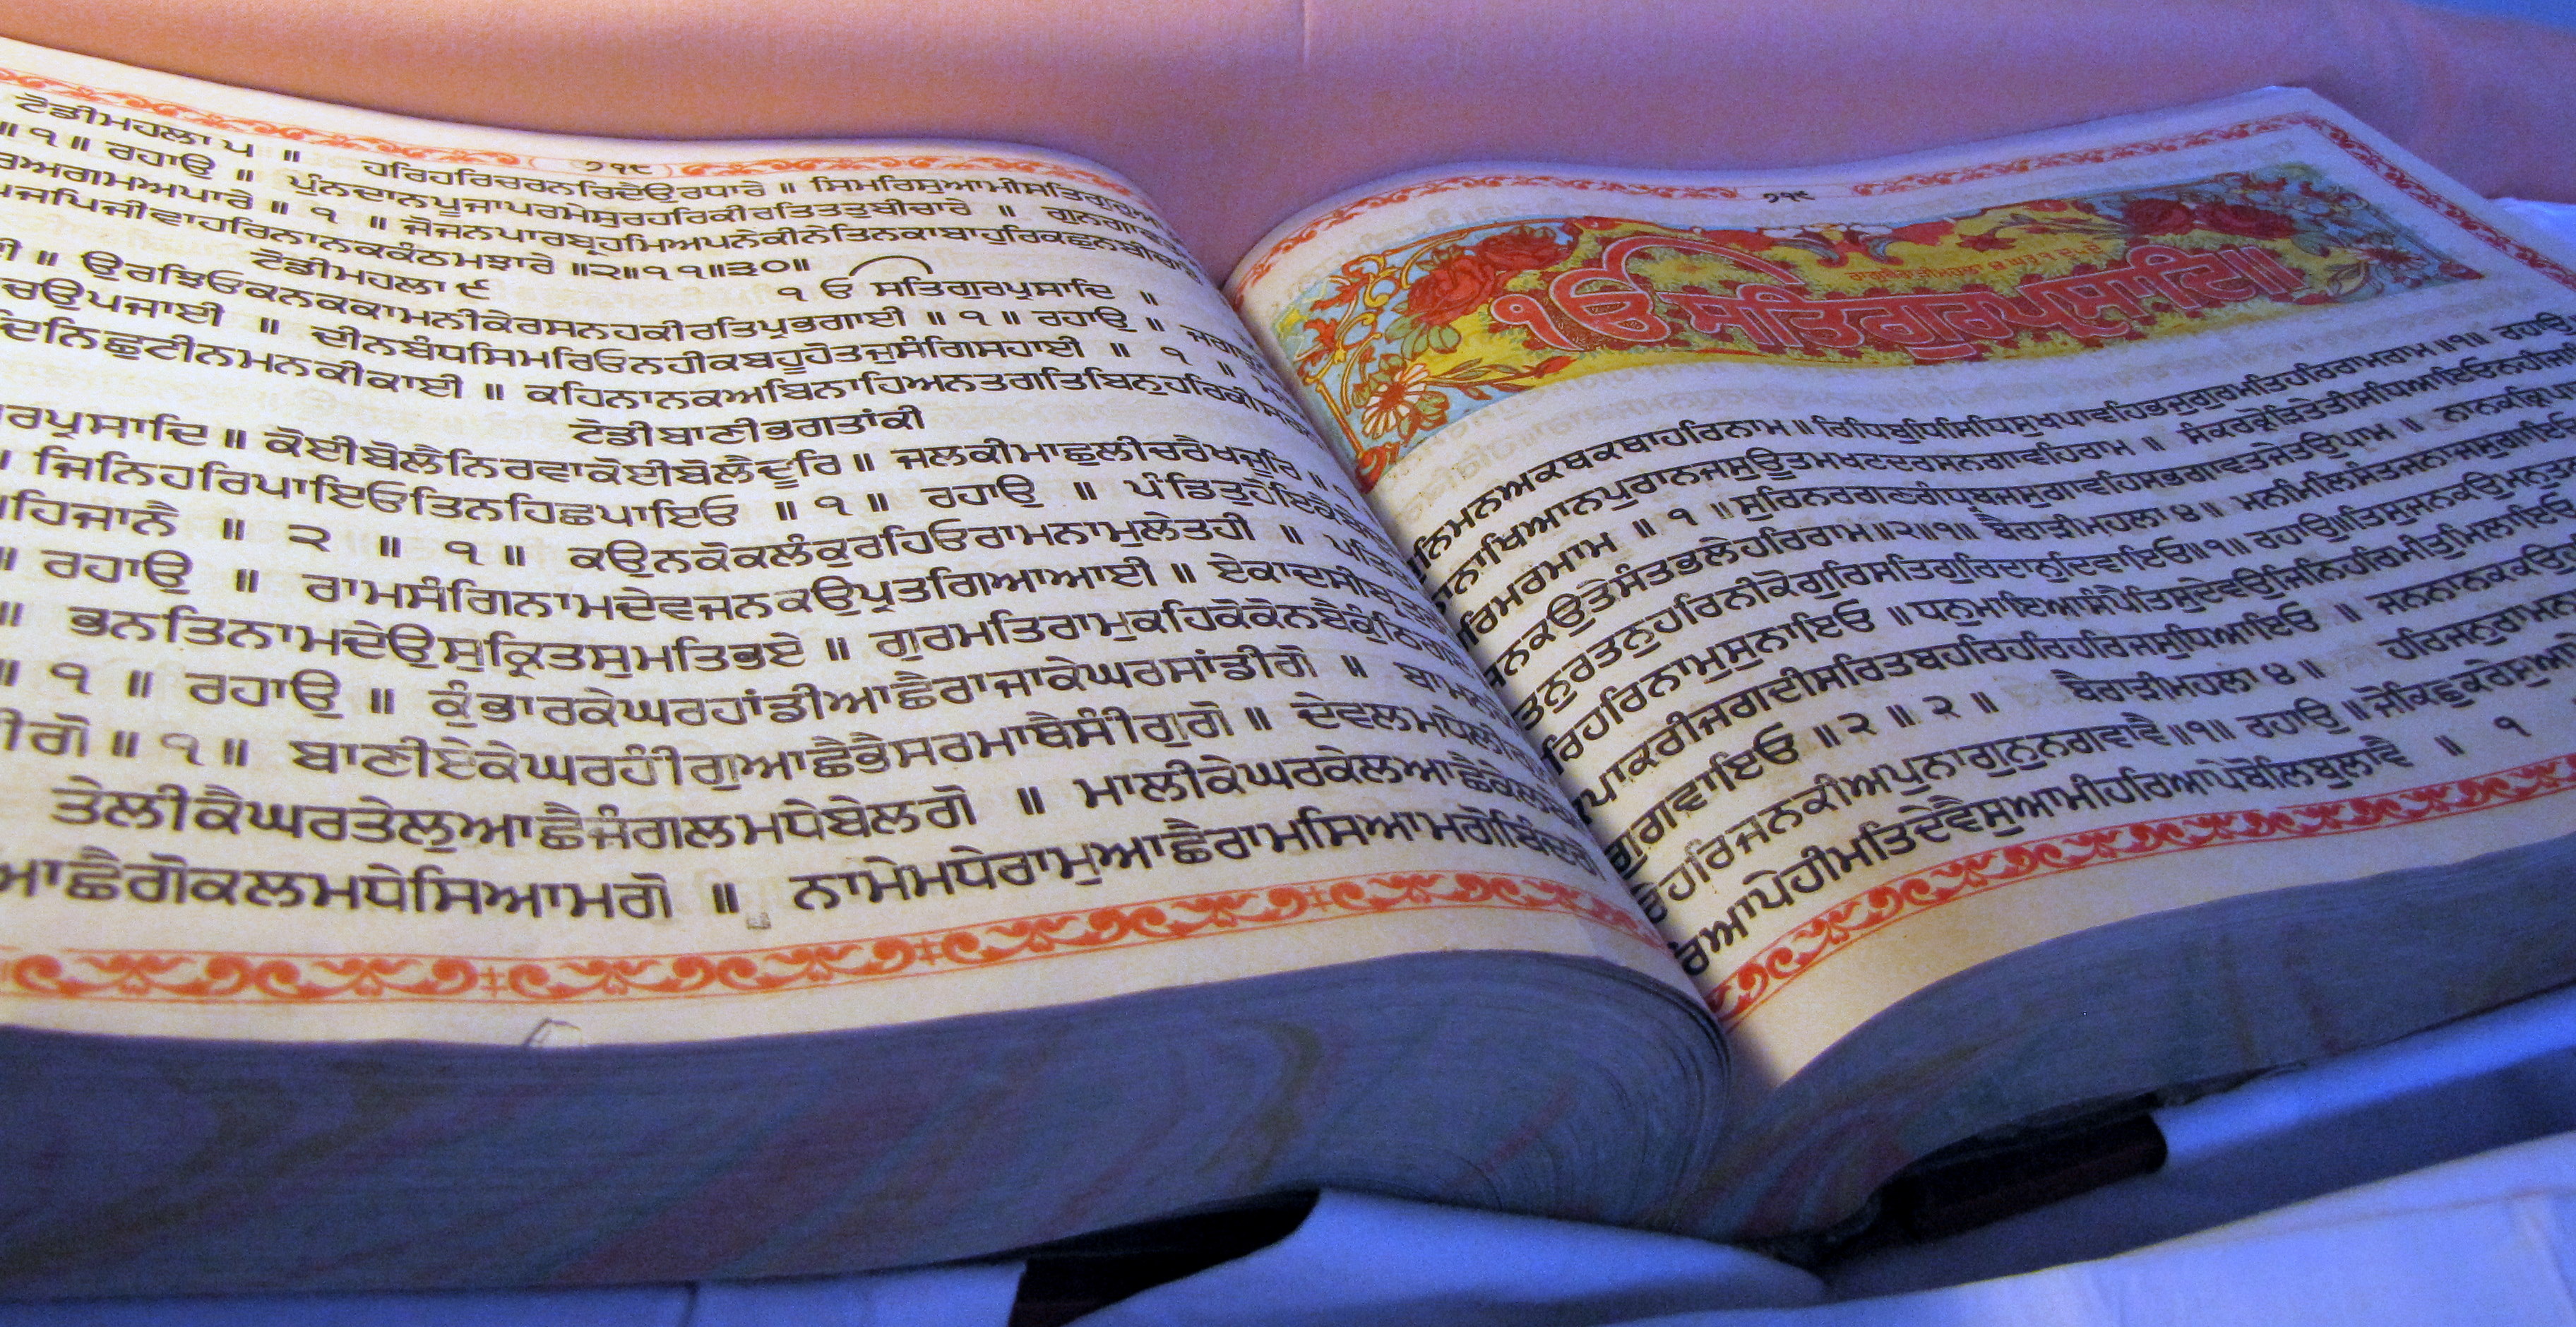 File:An open page from Guru Granth Sahib of Sikhism.jpg - Wikimedia Commons